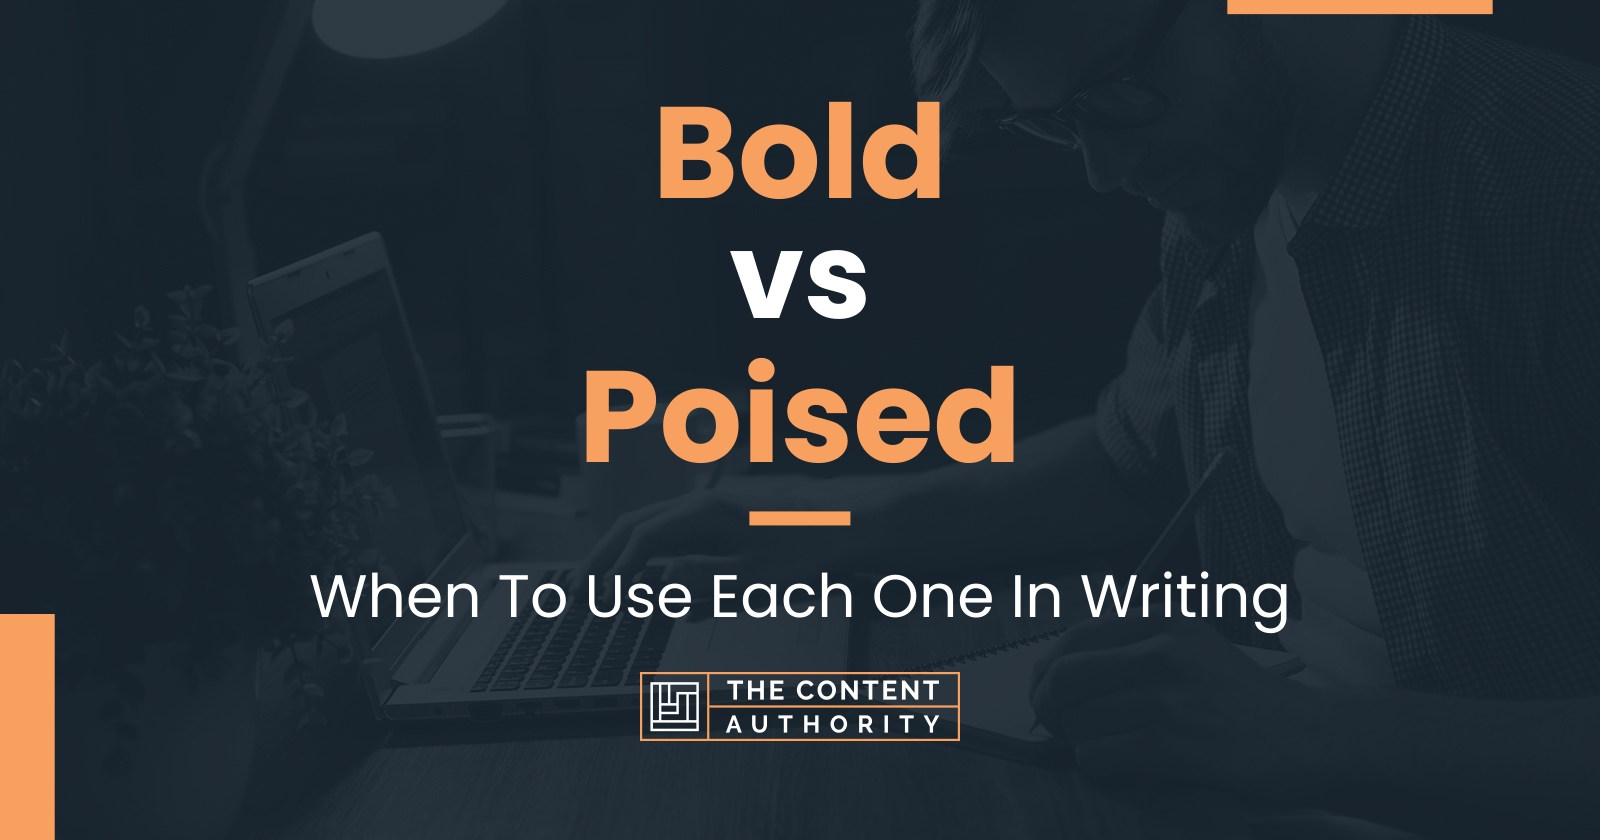 Bold vs Poised: When To Use Each One In Writing